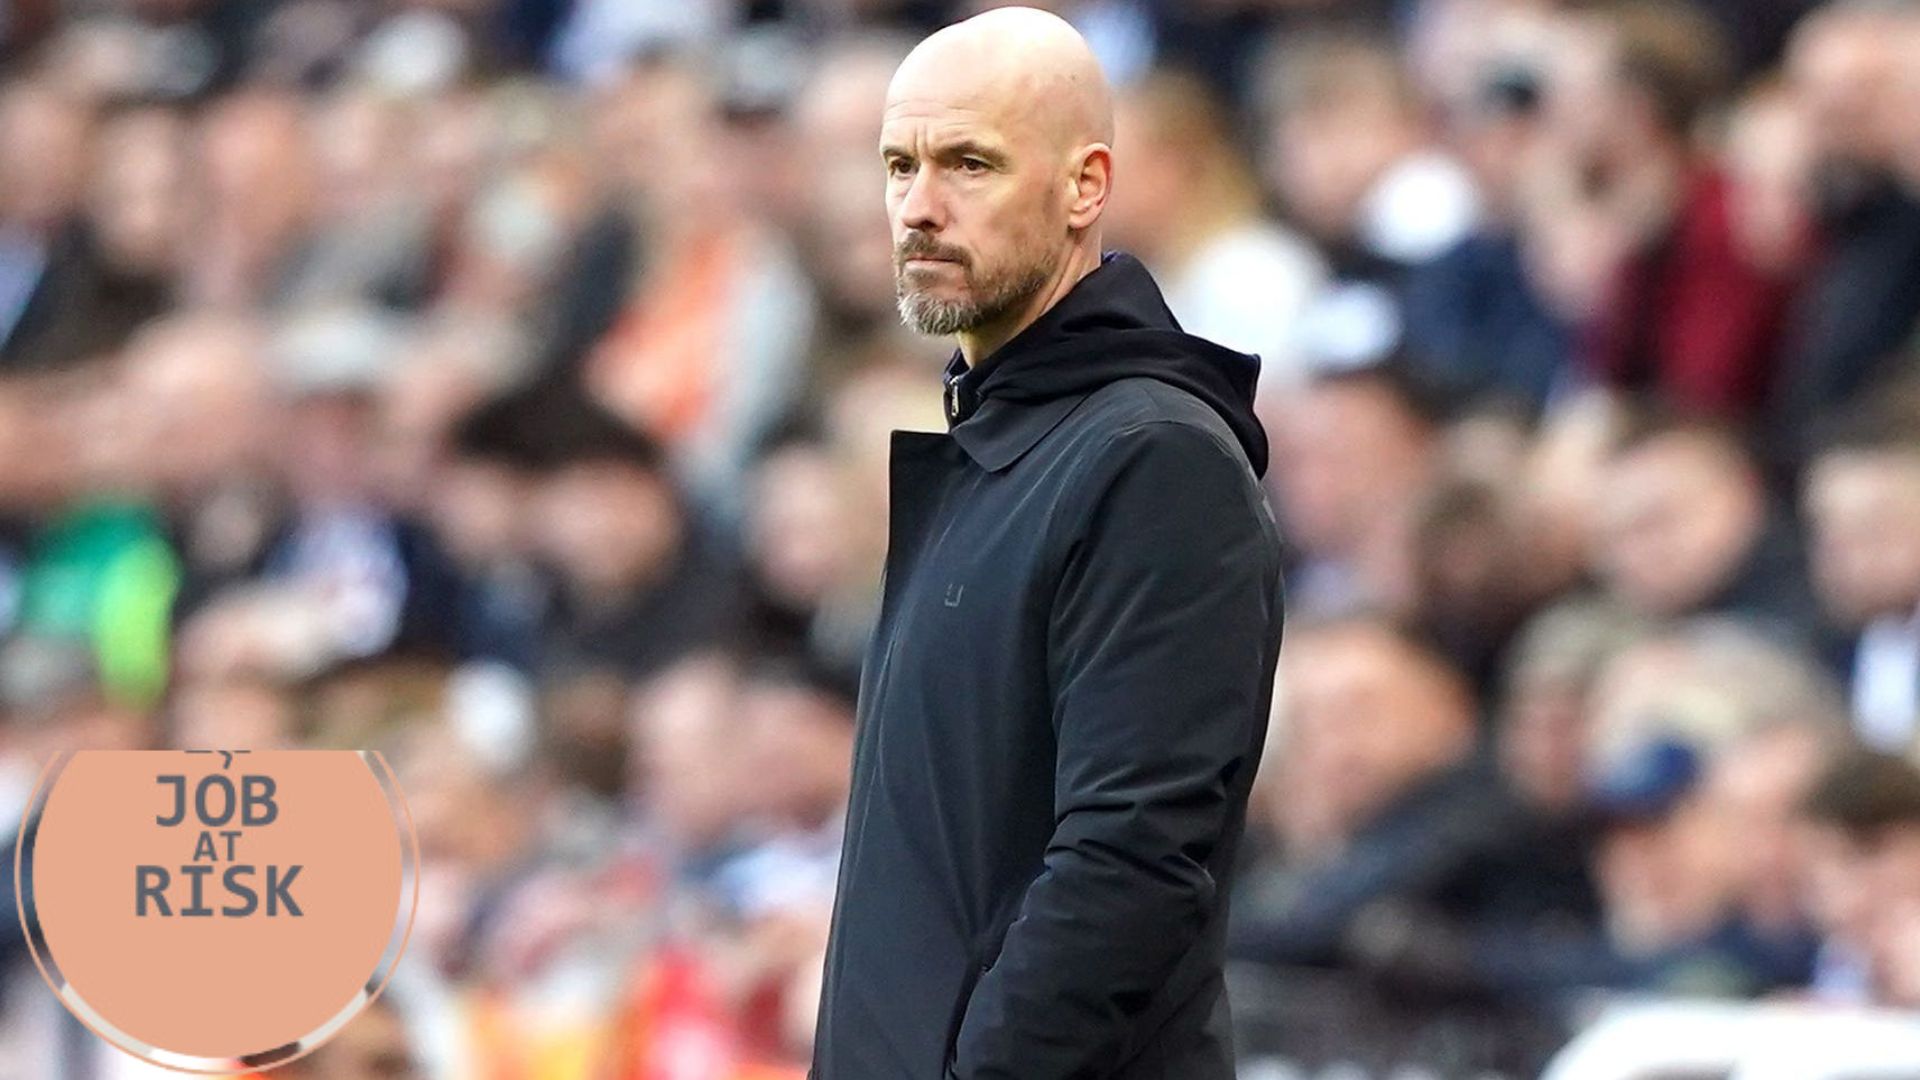 Erik ten Hag rumored to be in danger of losing his job at Manchester United, while Stan Kroenke's decision to hire Mikel Arteta at Arsenal pays off.